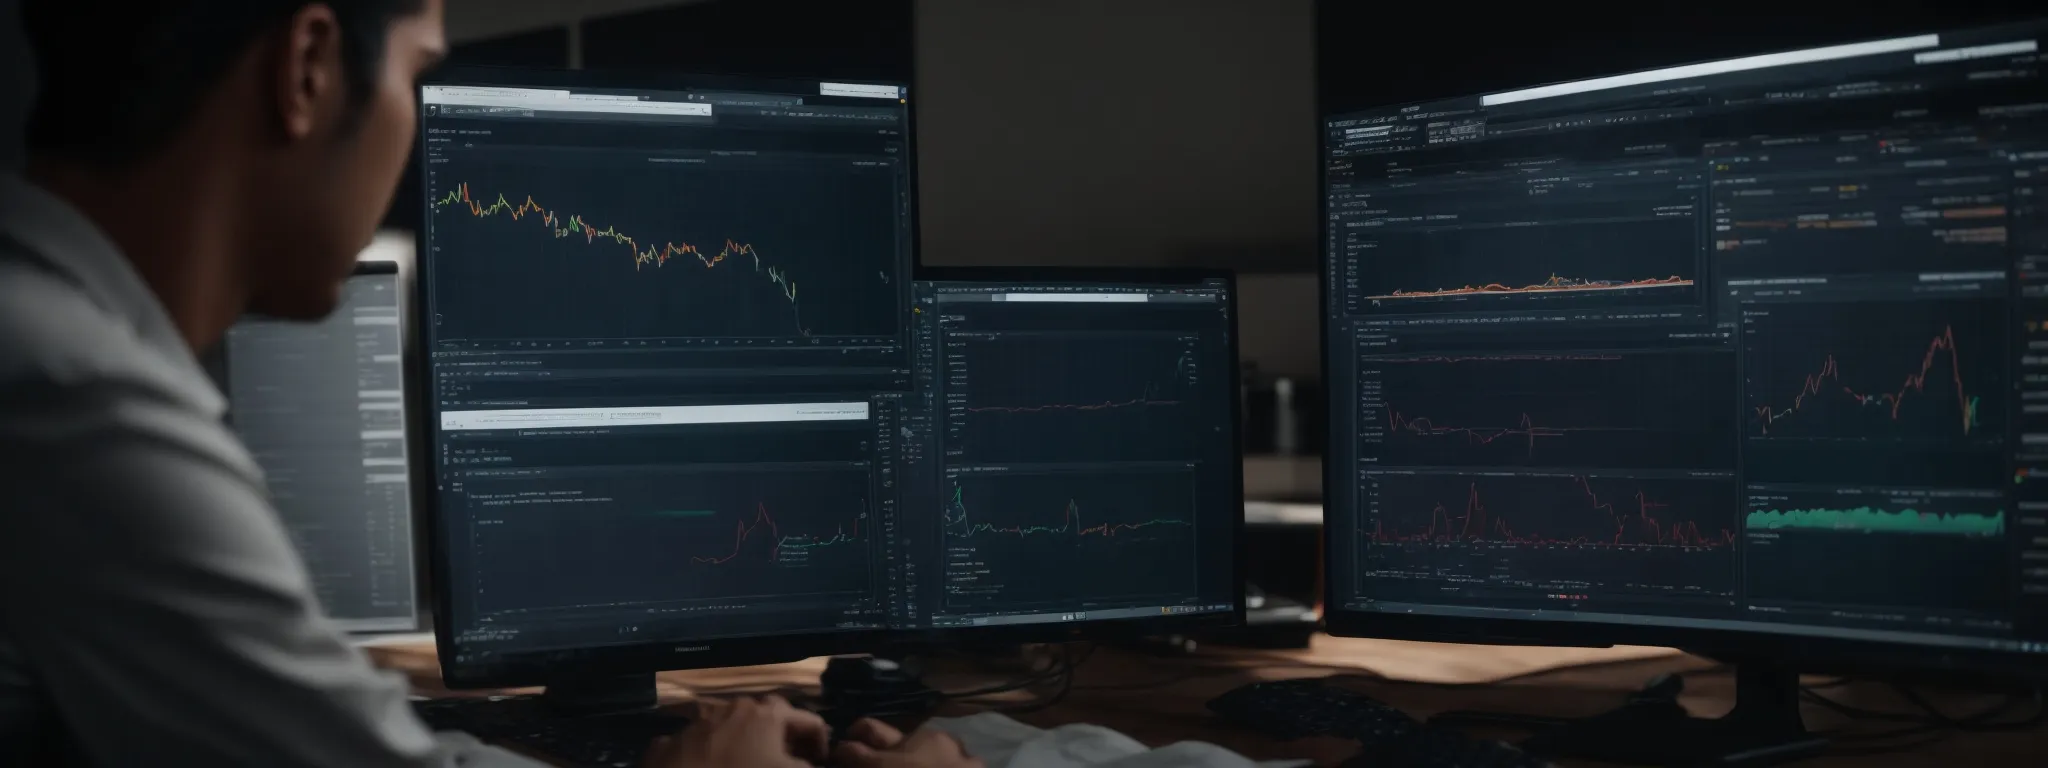 a person evaluating different open tabs on a computer monitor displaying graphs and analytics of website performance.